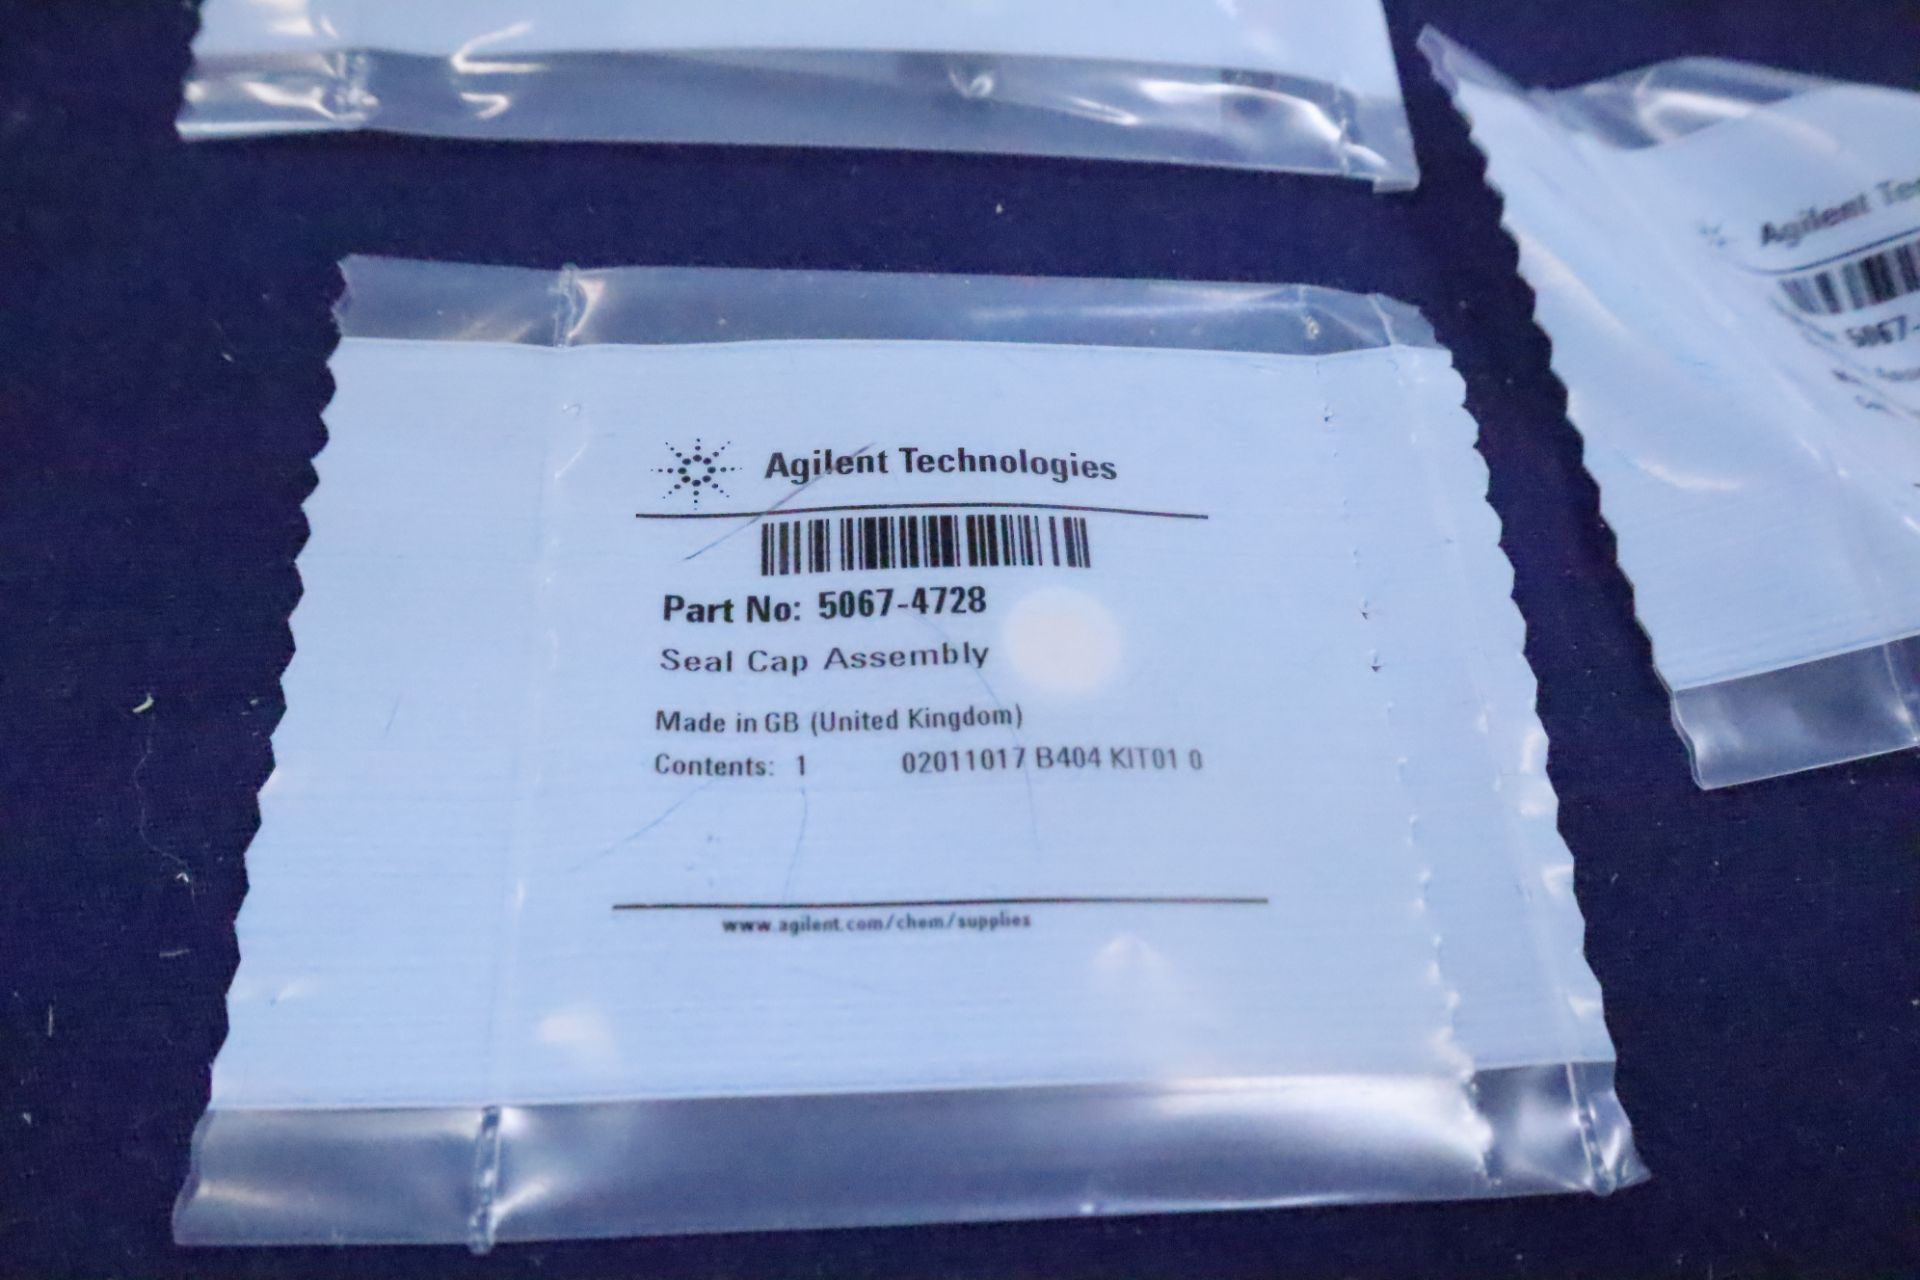 (NIB) Agilent Technologies OEM Replacement Parts for LC/MS Machines - Image 20 of 24